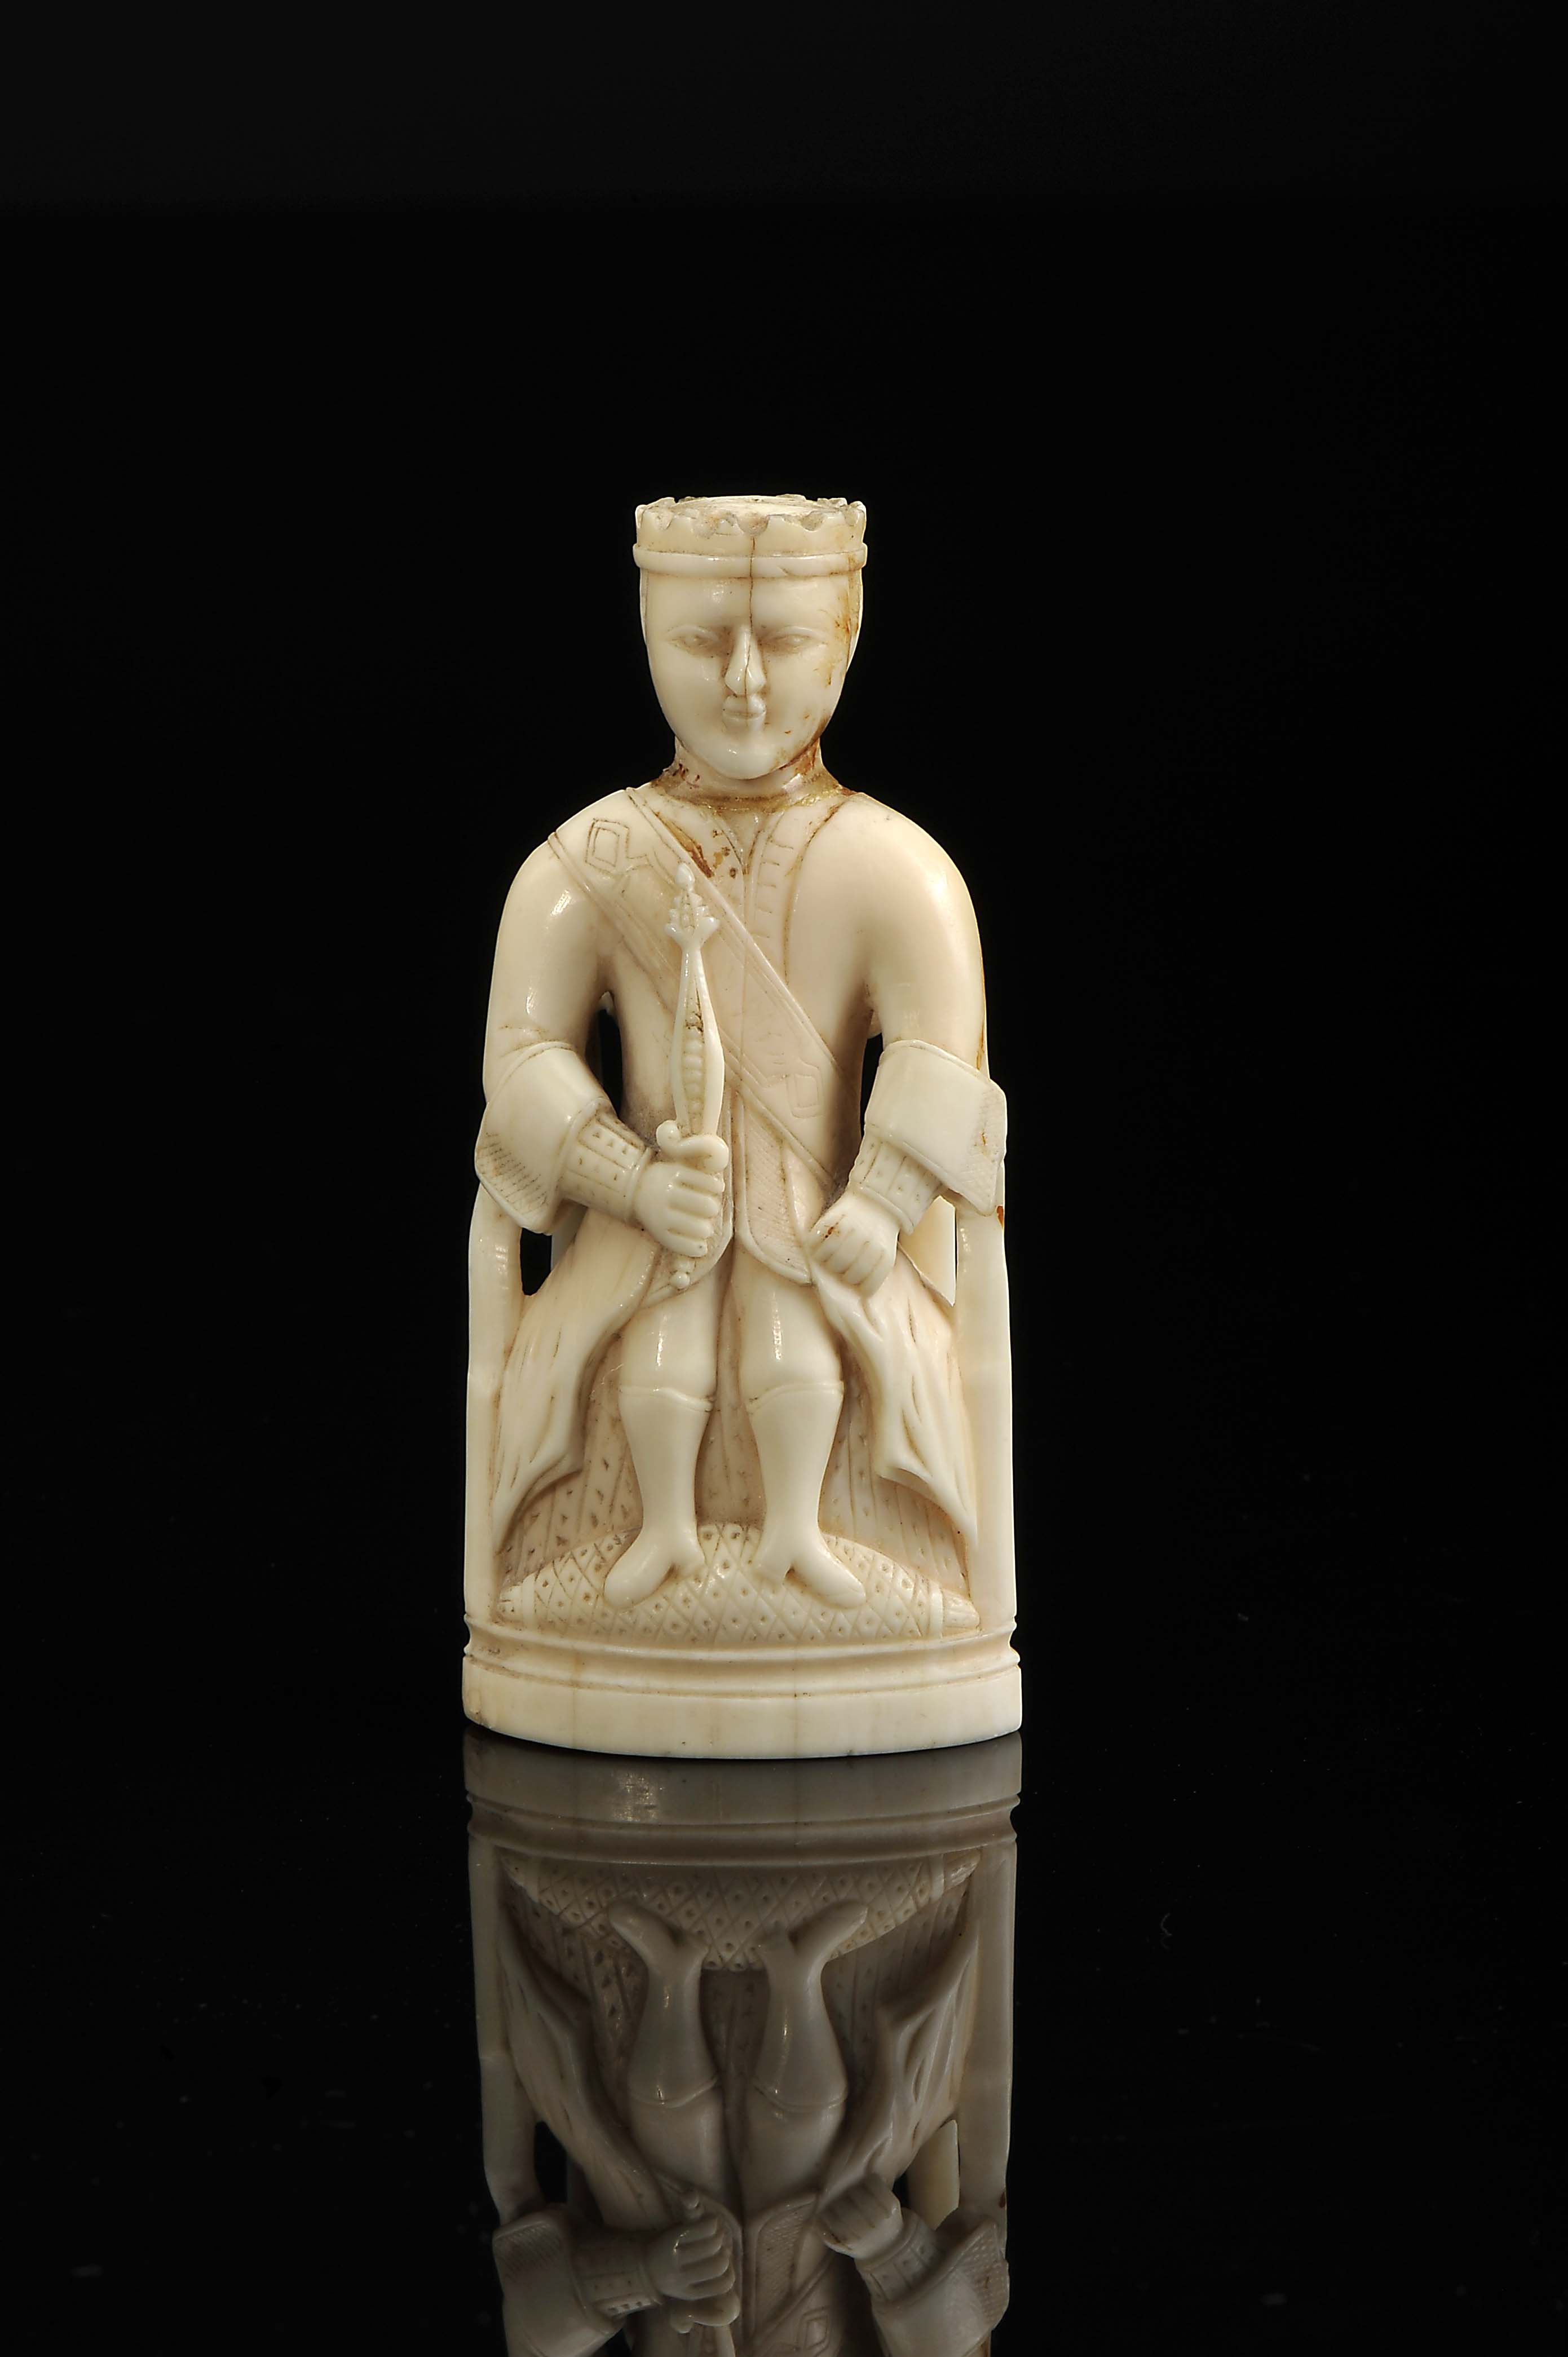 King with scepter - Image 3 of 6